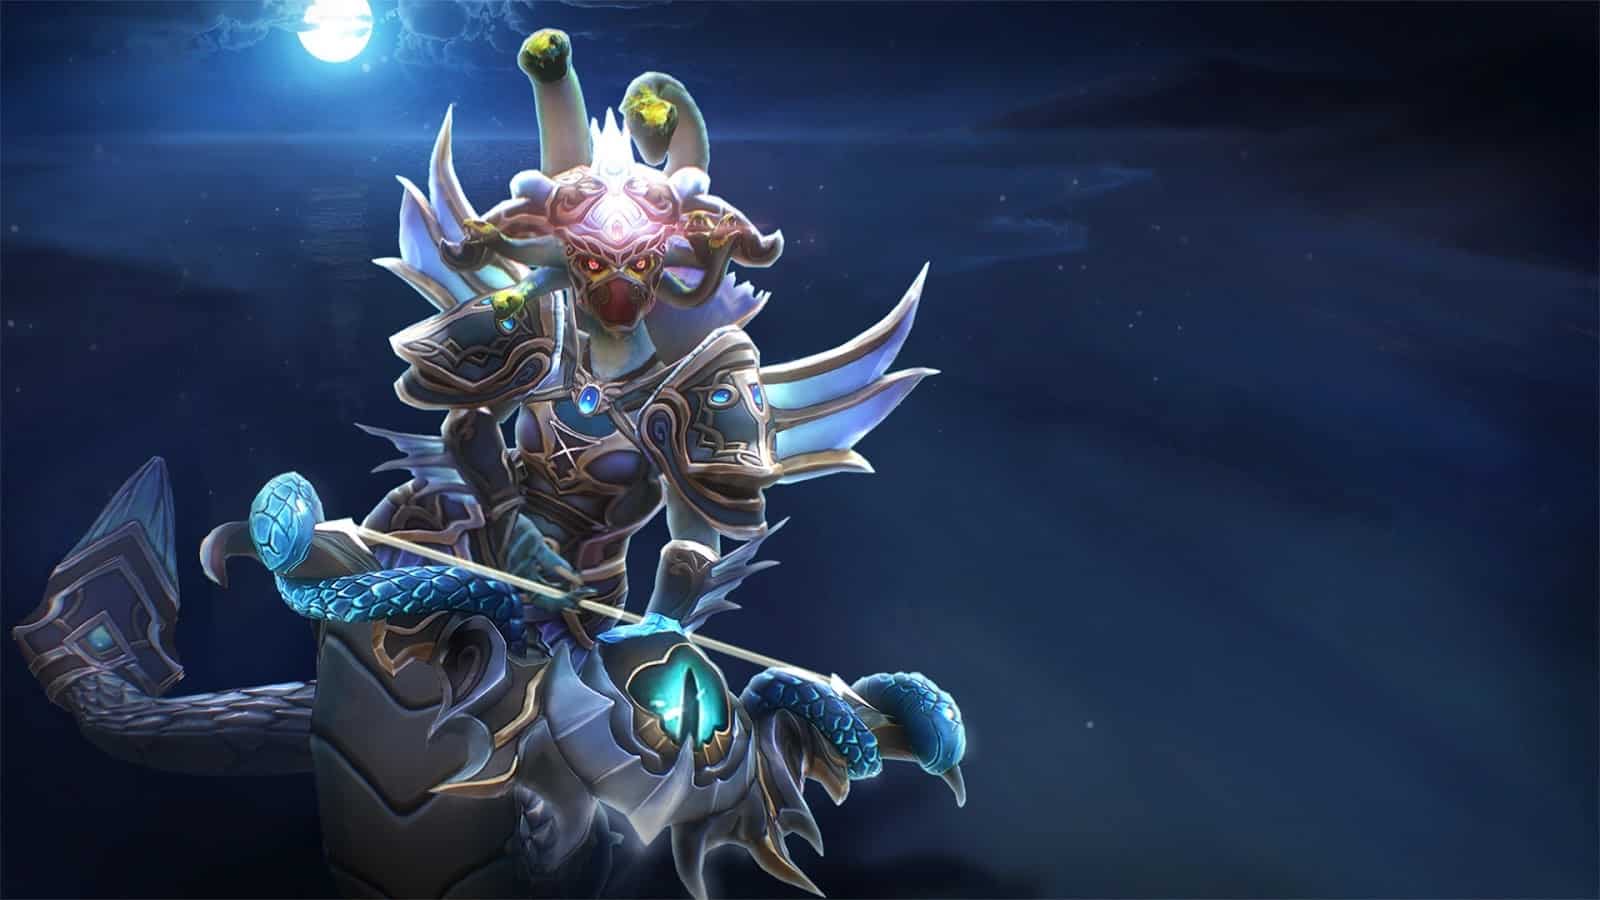 Dota 2: Which 4 Heroes Have The Highest Win Rate In Patch 7.33c So far?